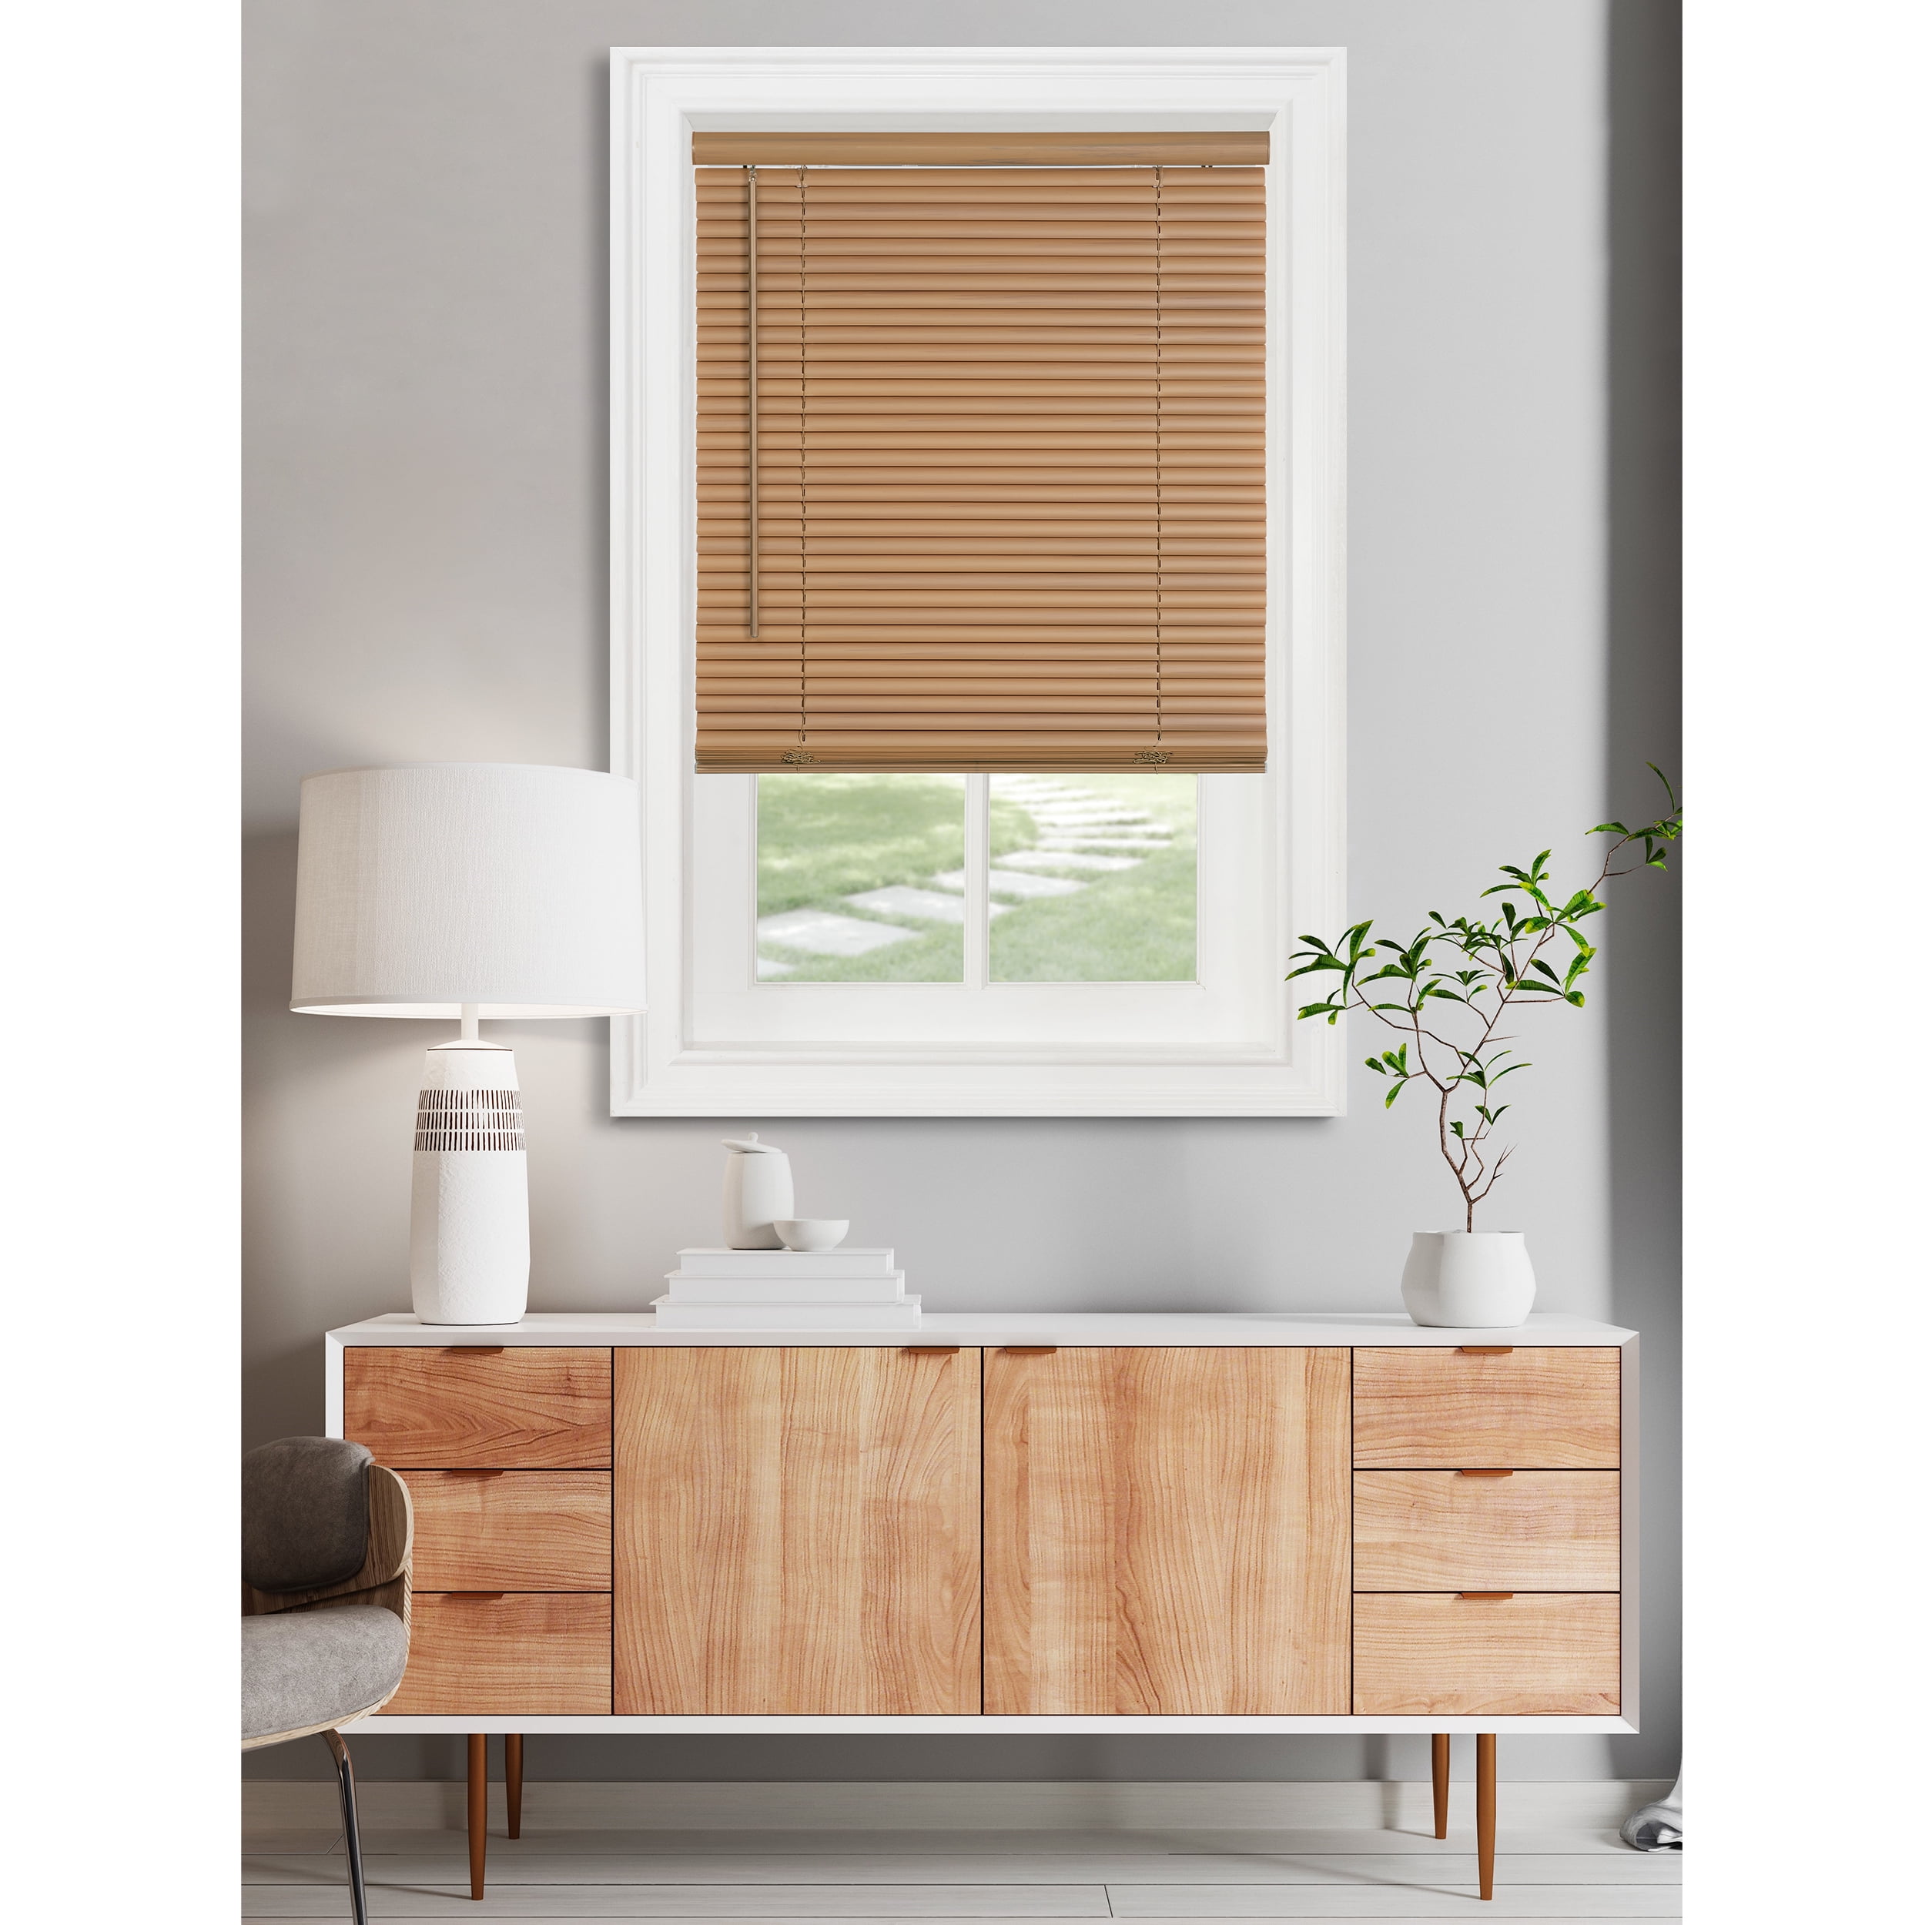 Picture of Achim MSG235WD06 Cordless GII Morningstar 1 in. Light Filtering Mini - Blind 35 x 64 in. - Woodtone